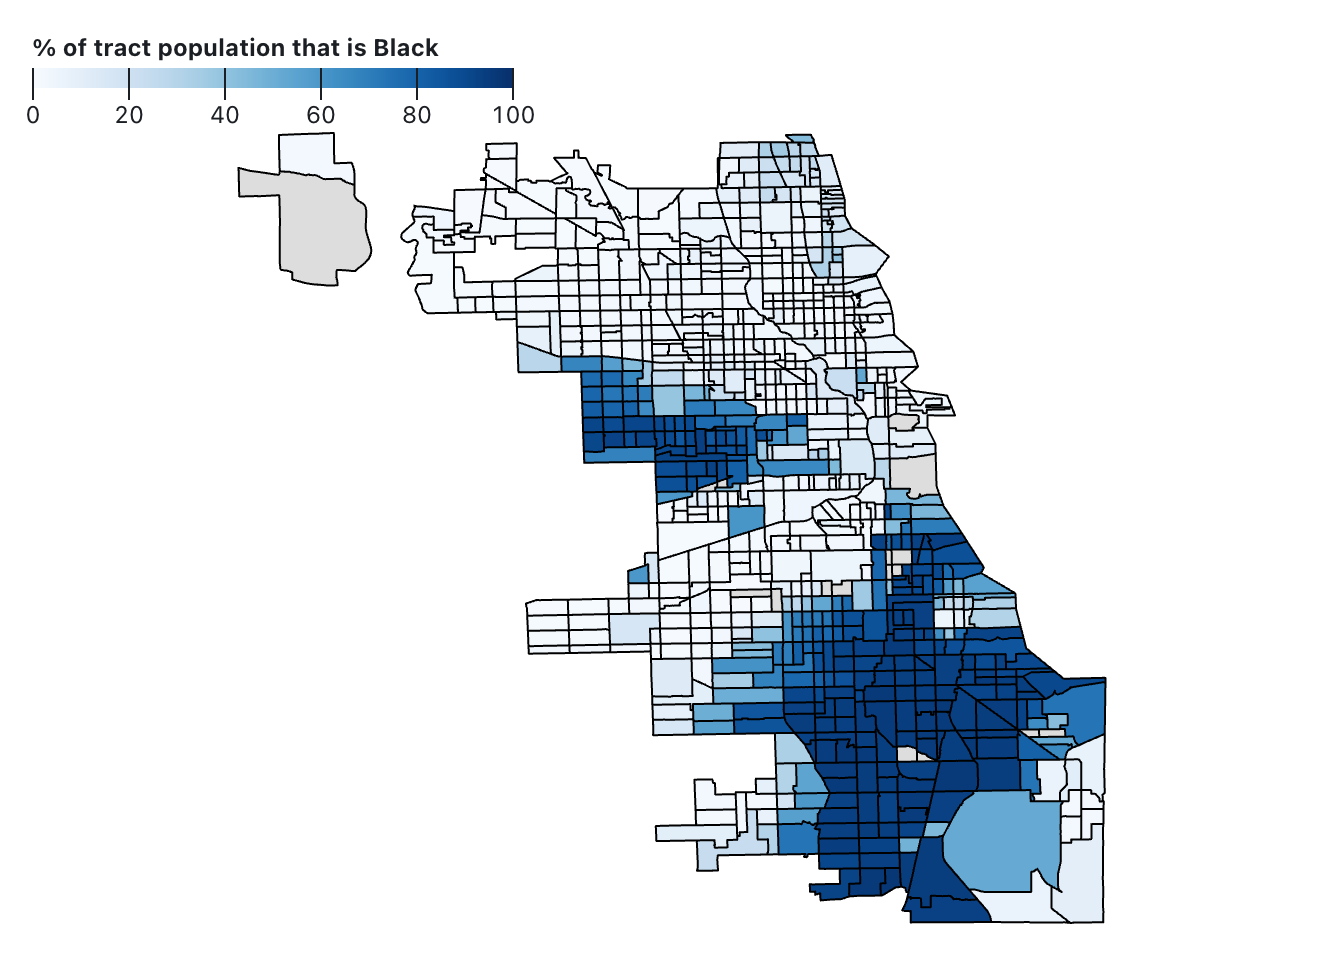 this is a picture of a map showing census tracts in Chicago